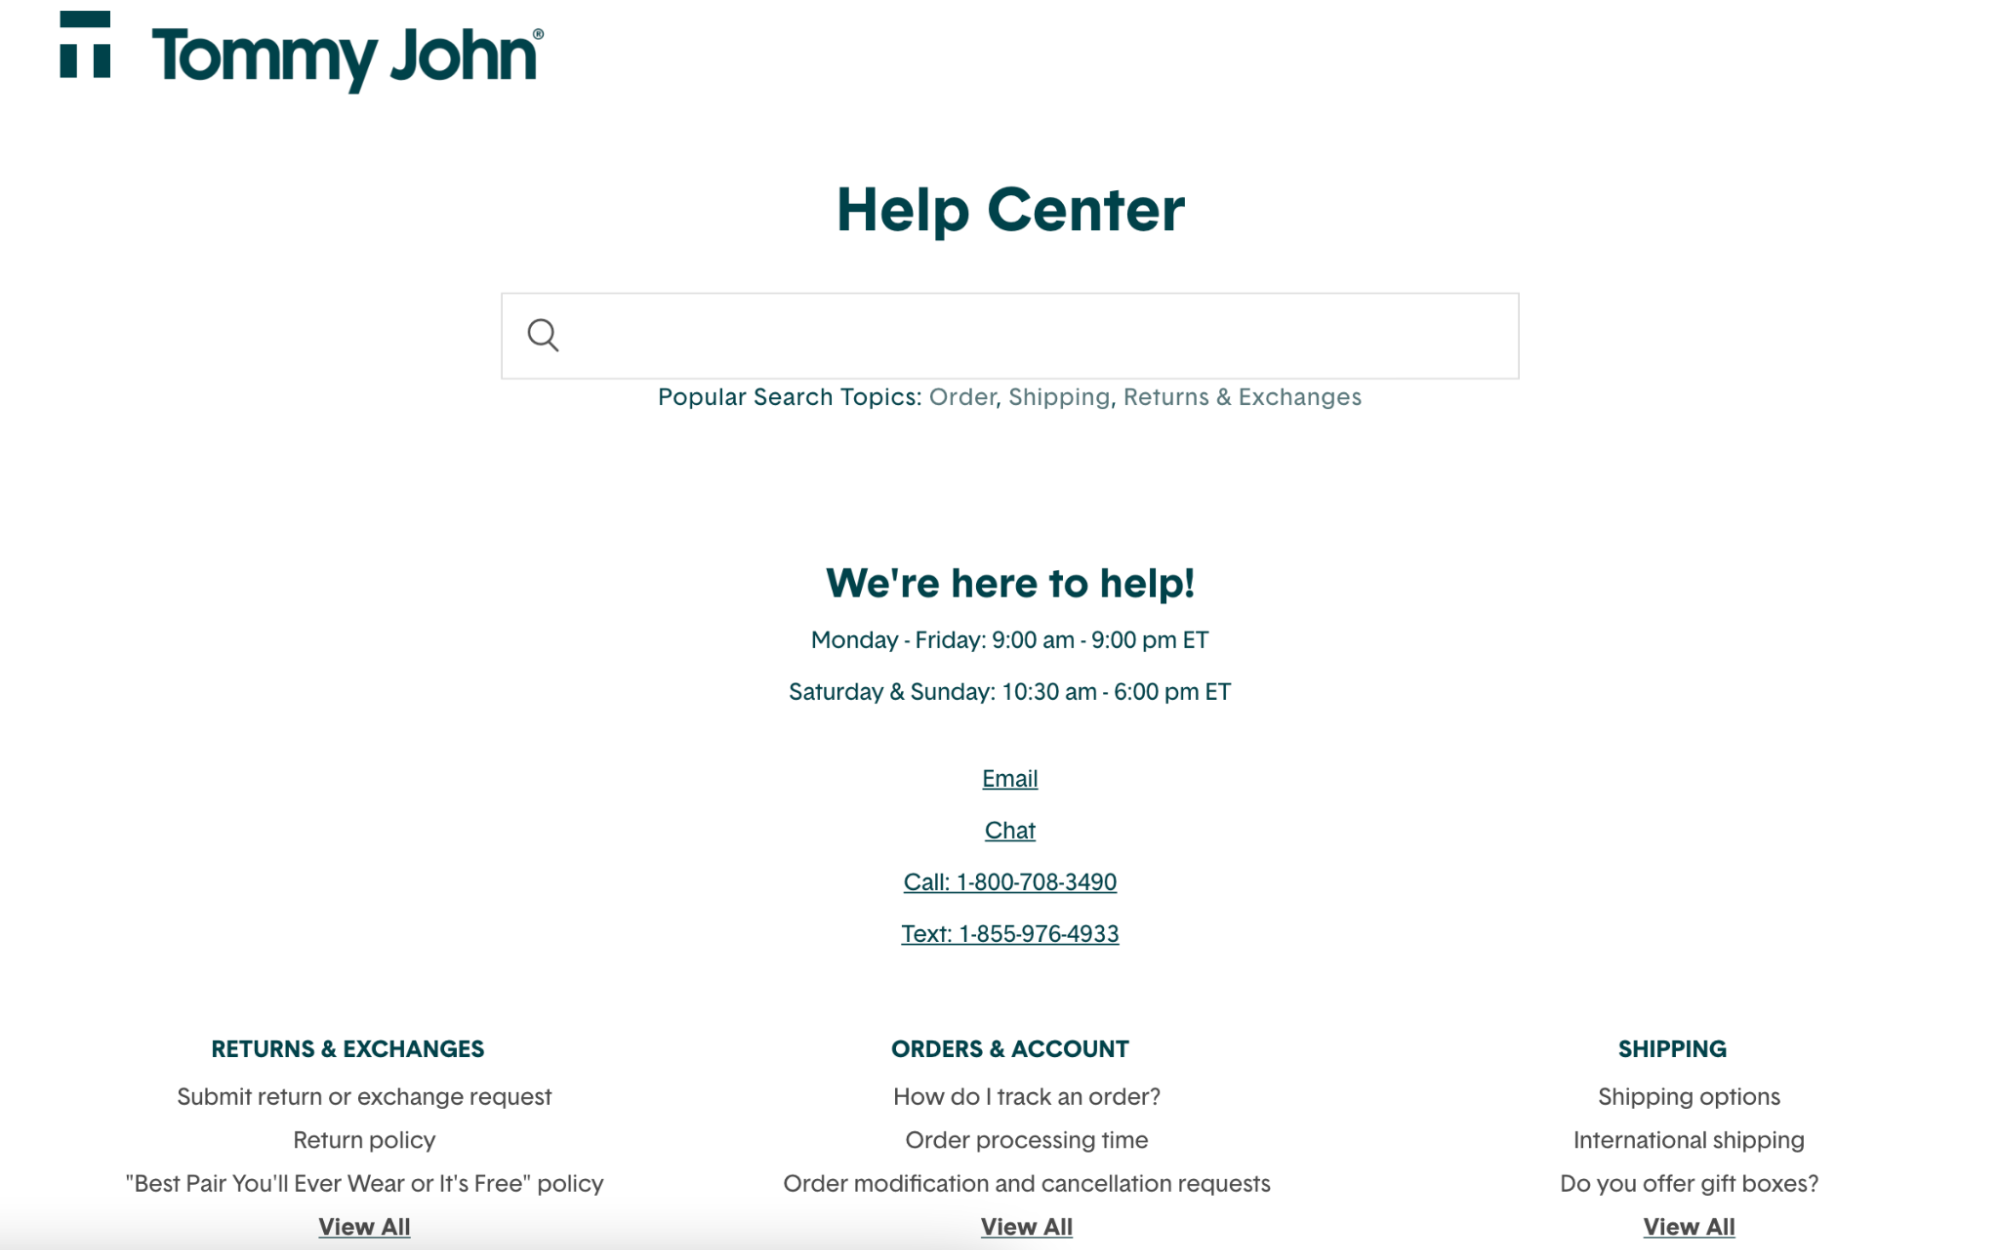 Image of Tommy John’s contact page with different options to get in touch.